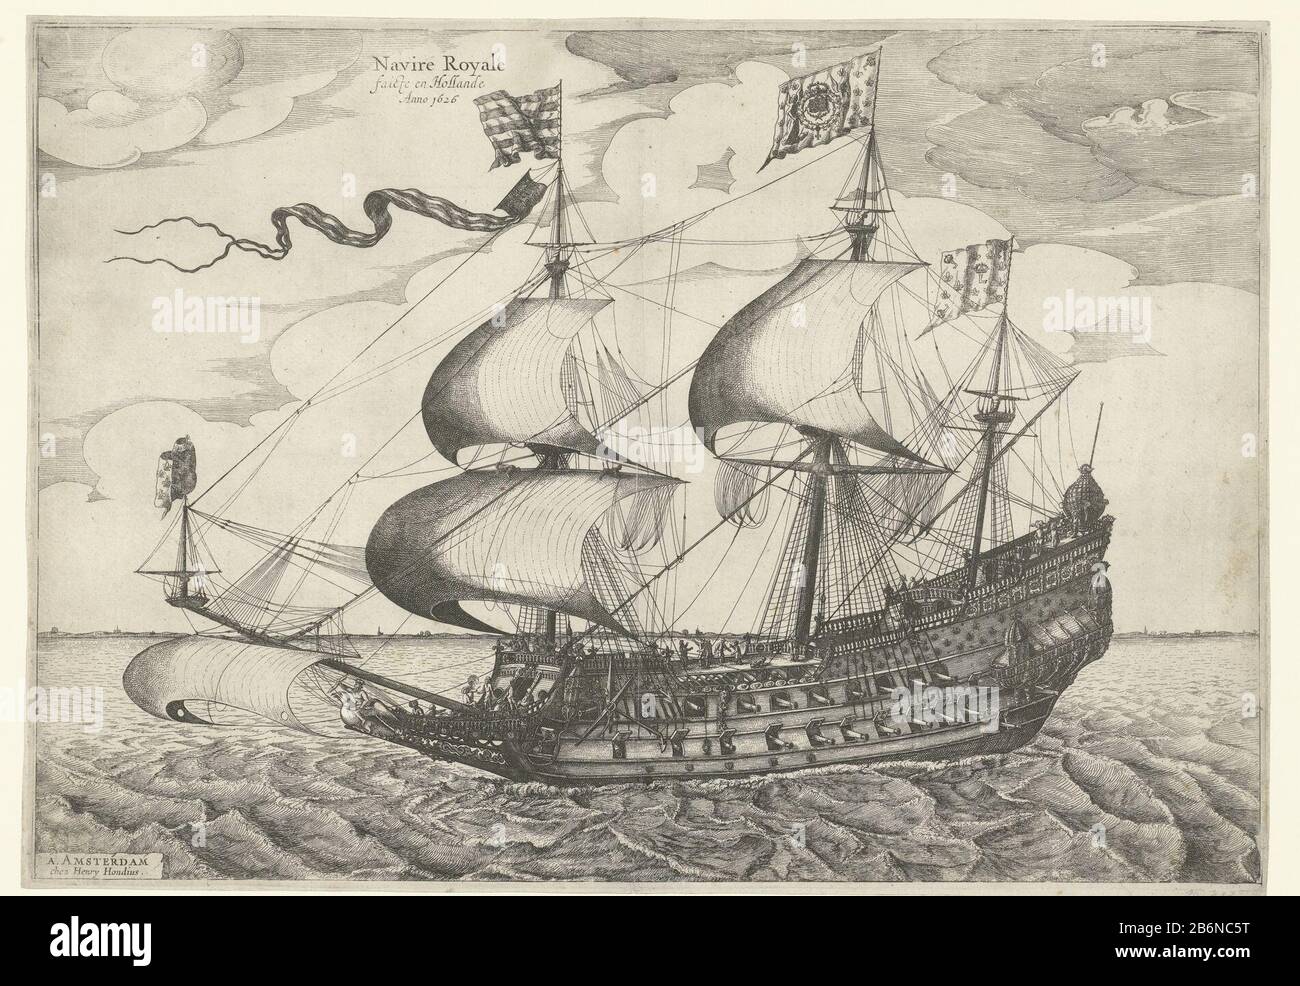 Frans oorlogsschip, gebouwd in Holland, 1626 Navire Royale faicte en Hollande Anno 1626 (titel op object) A French warship, built in Holland, 1626. Large warship in full length, with expanded sails; with three masts with several French flags in the sea. In the offing the Dutch kust. Manufacturer : print maker: anonymous publisher: Hendrick Hondius (indicated on object) Place manufacture: print maker: Northern Netherlands Publisher: Amsterdam Date: 1626 Physical characteristics: etching material: paper Technique: etching dimensions: plate edge: H 370 mm × W 528 mm Subject: ships (in general) (+ Stock Photo